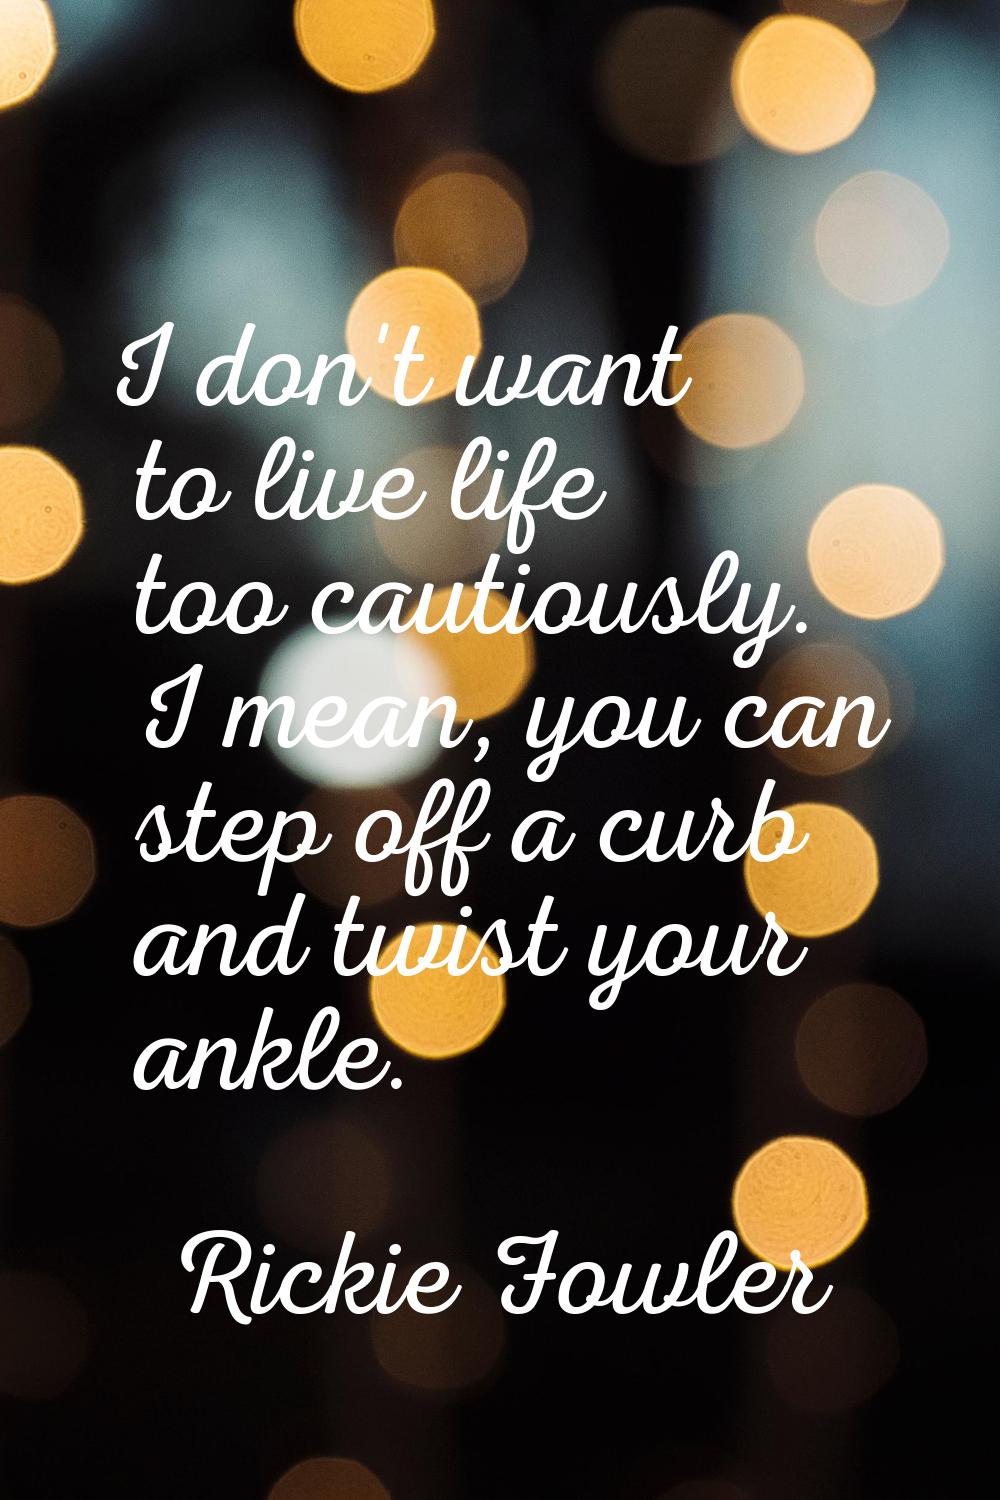 I don't want to live life too cautiously. I mean, you can step off a curb and twist your ankle.